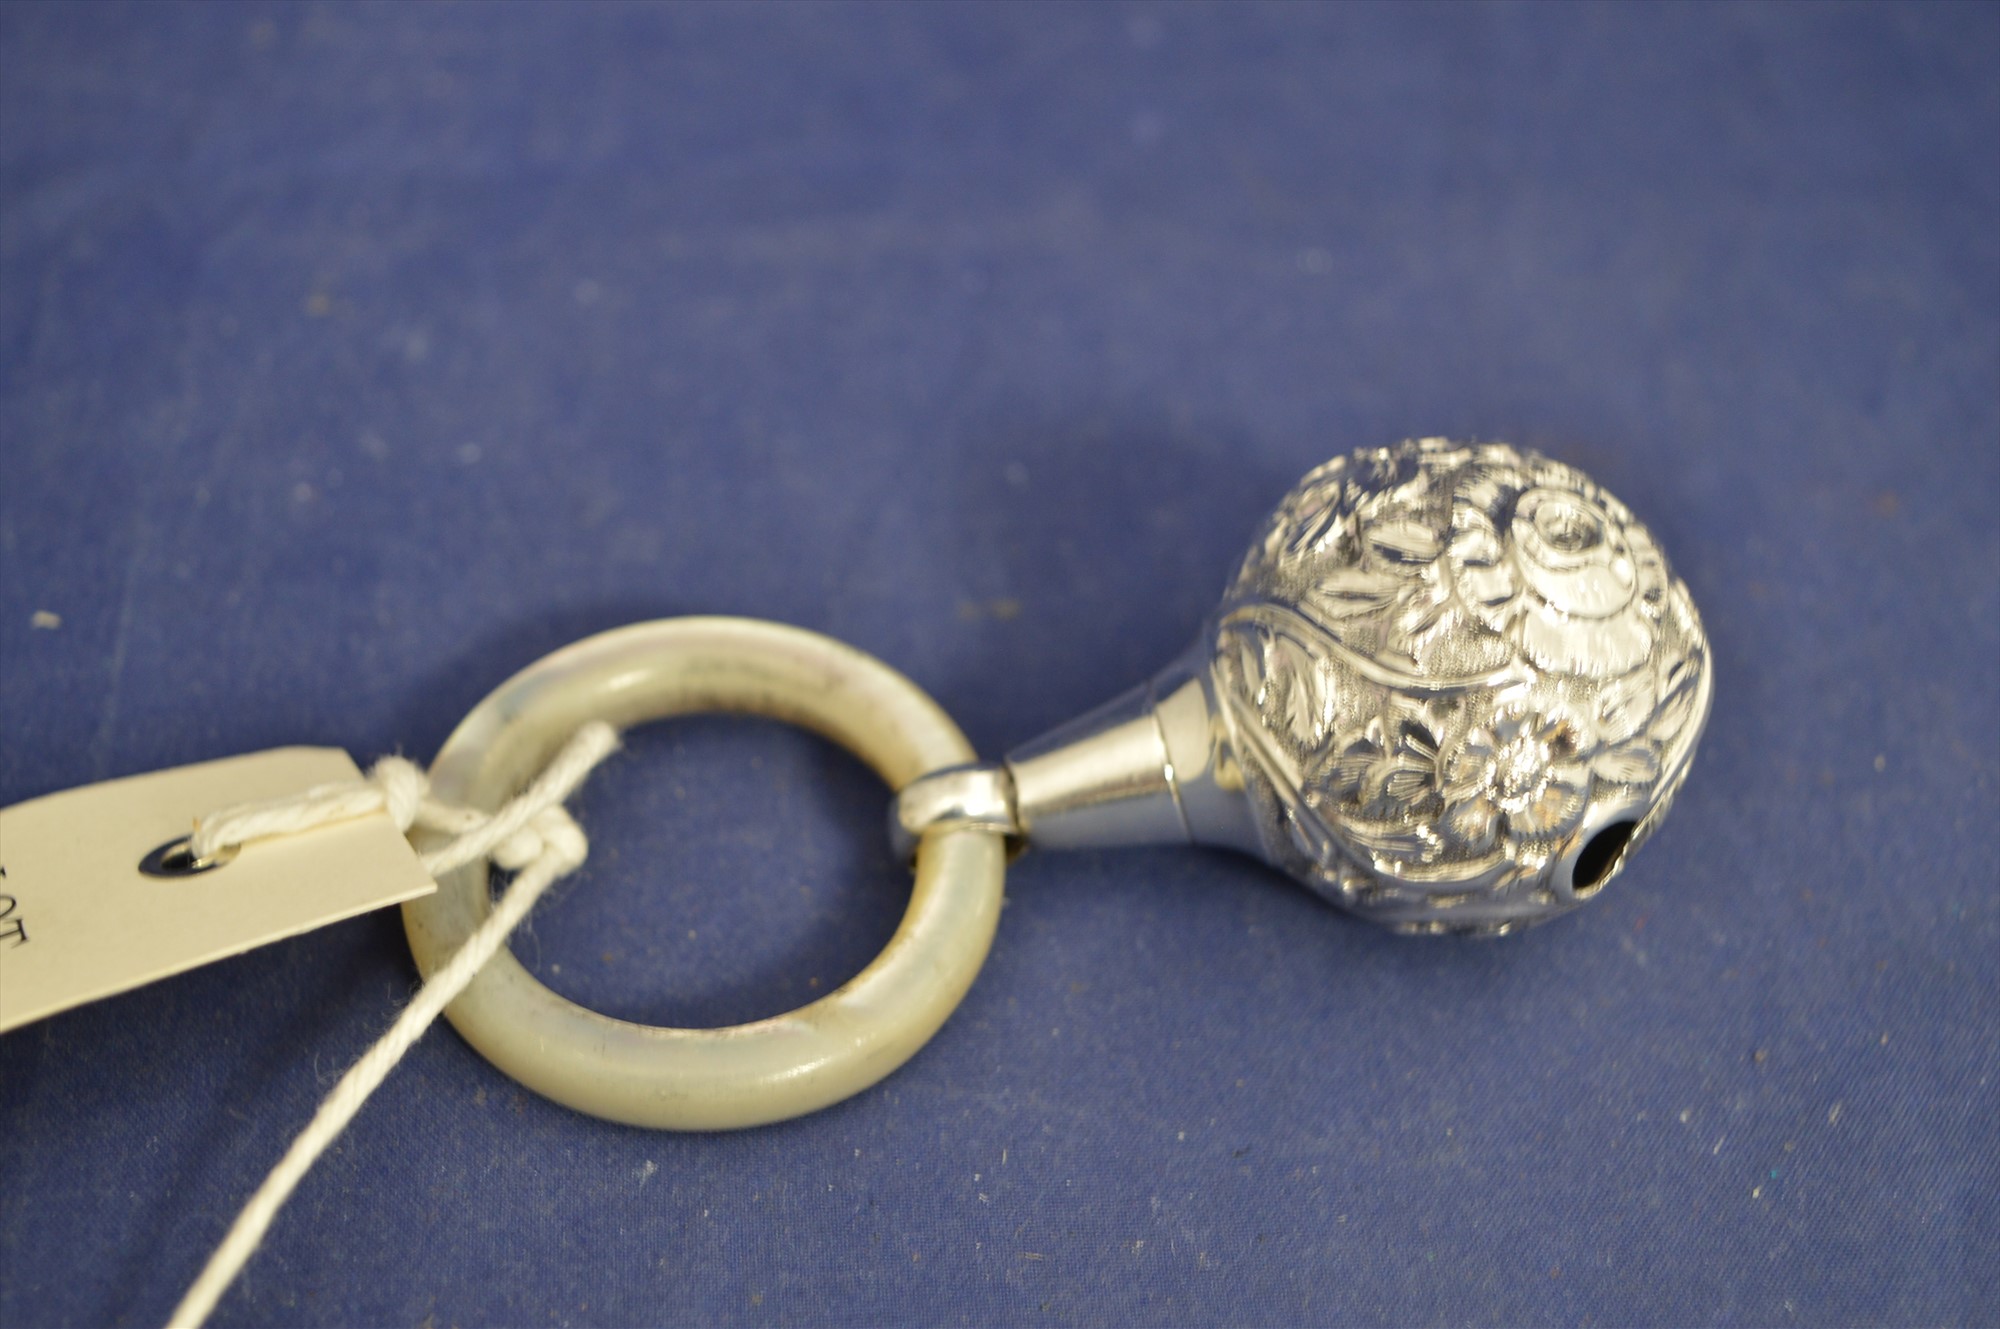 Silver child's rattle